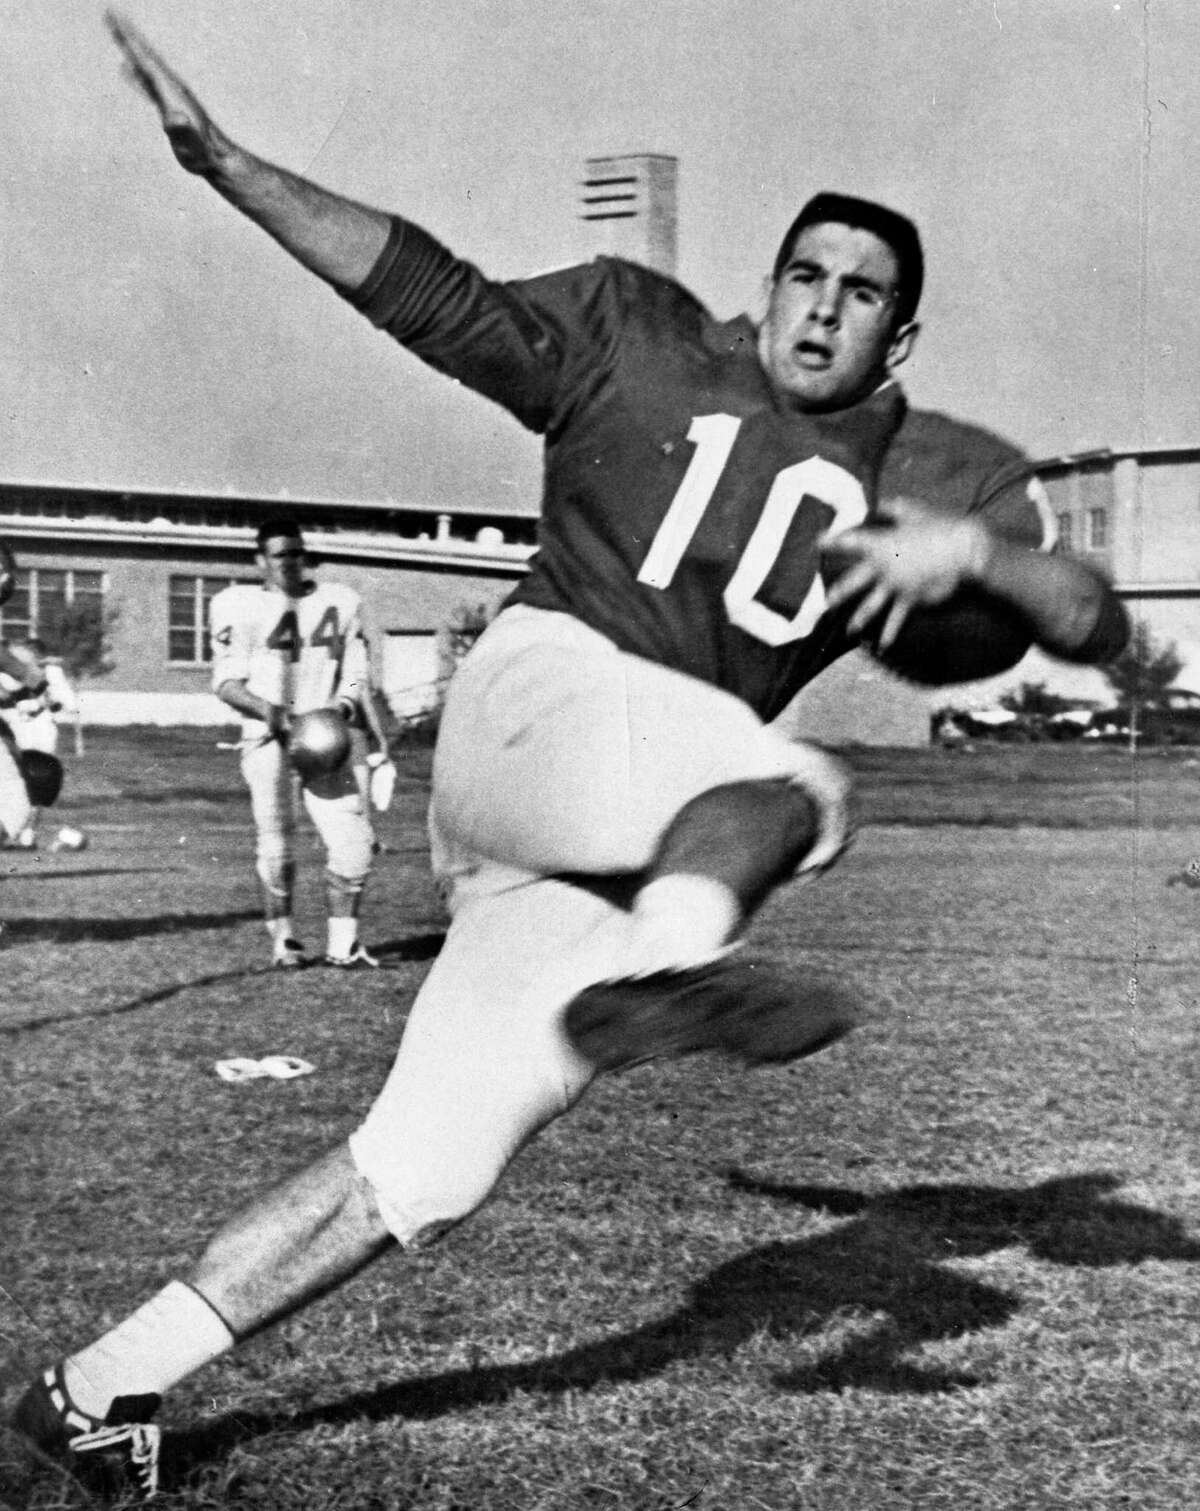 1960s LINUS BAER, LEE HIGH SCHOOL FOOTBALL HALFBACK FROM THE 1960s. PHOTO COURTESY OF LINUS BAER